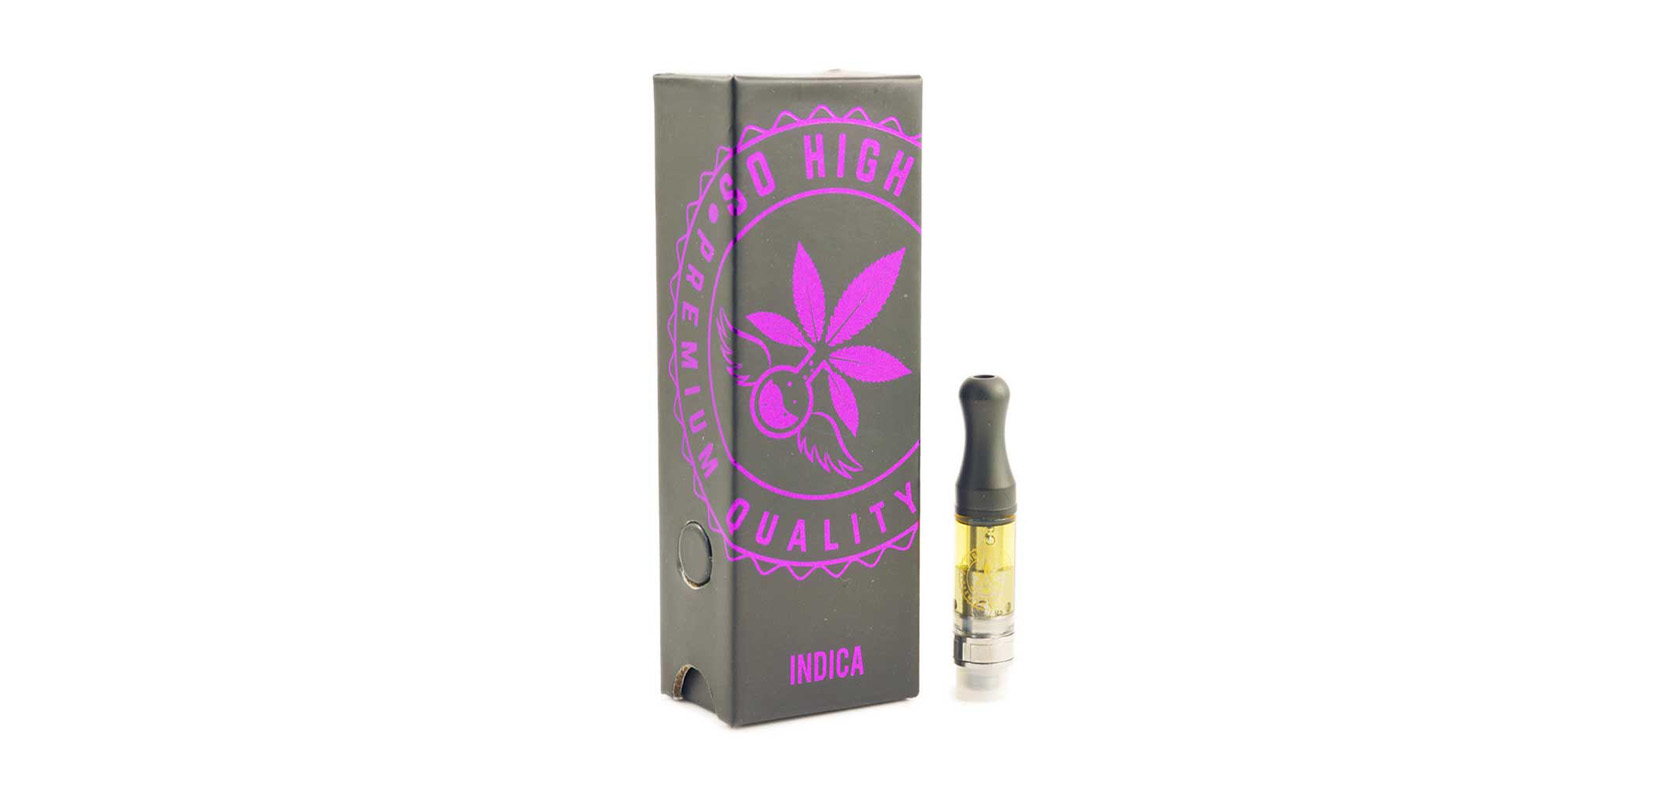 Blood Orange THC oil vape cartridge at Low Price Bud weed dispensary for vape pens and vape carts. buy weed online Canada. dispensary weed.